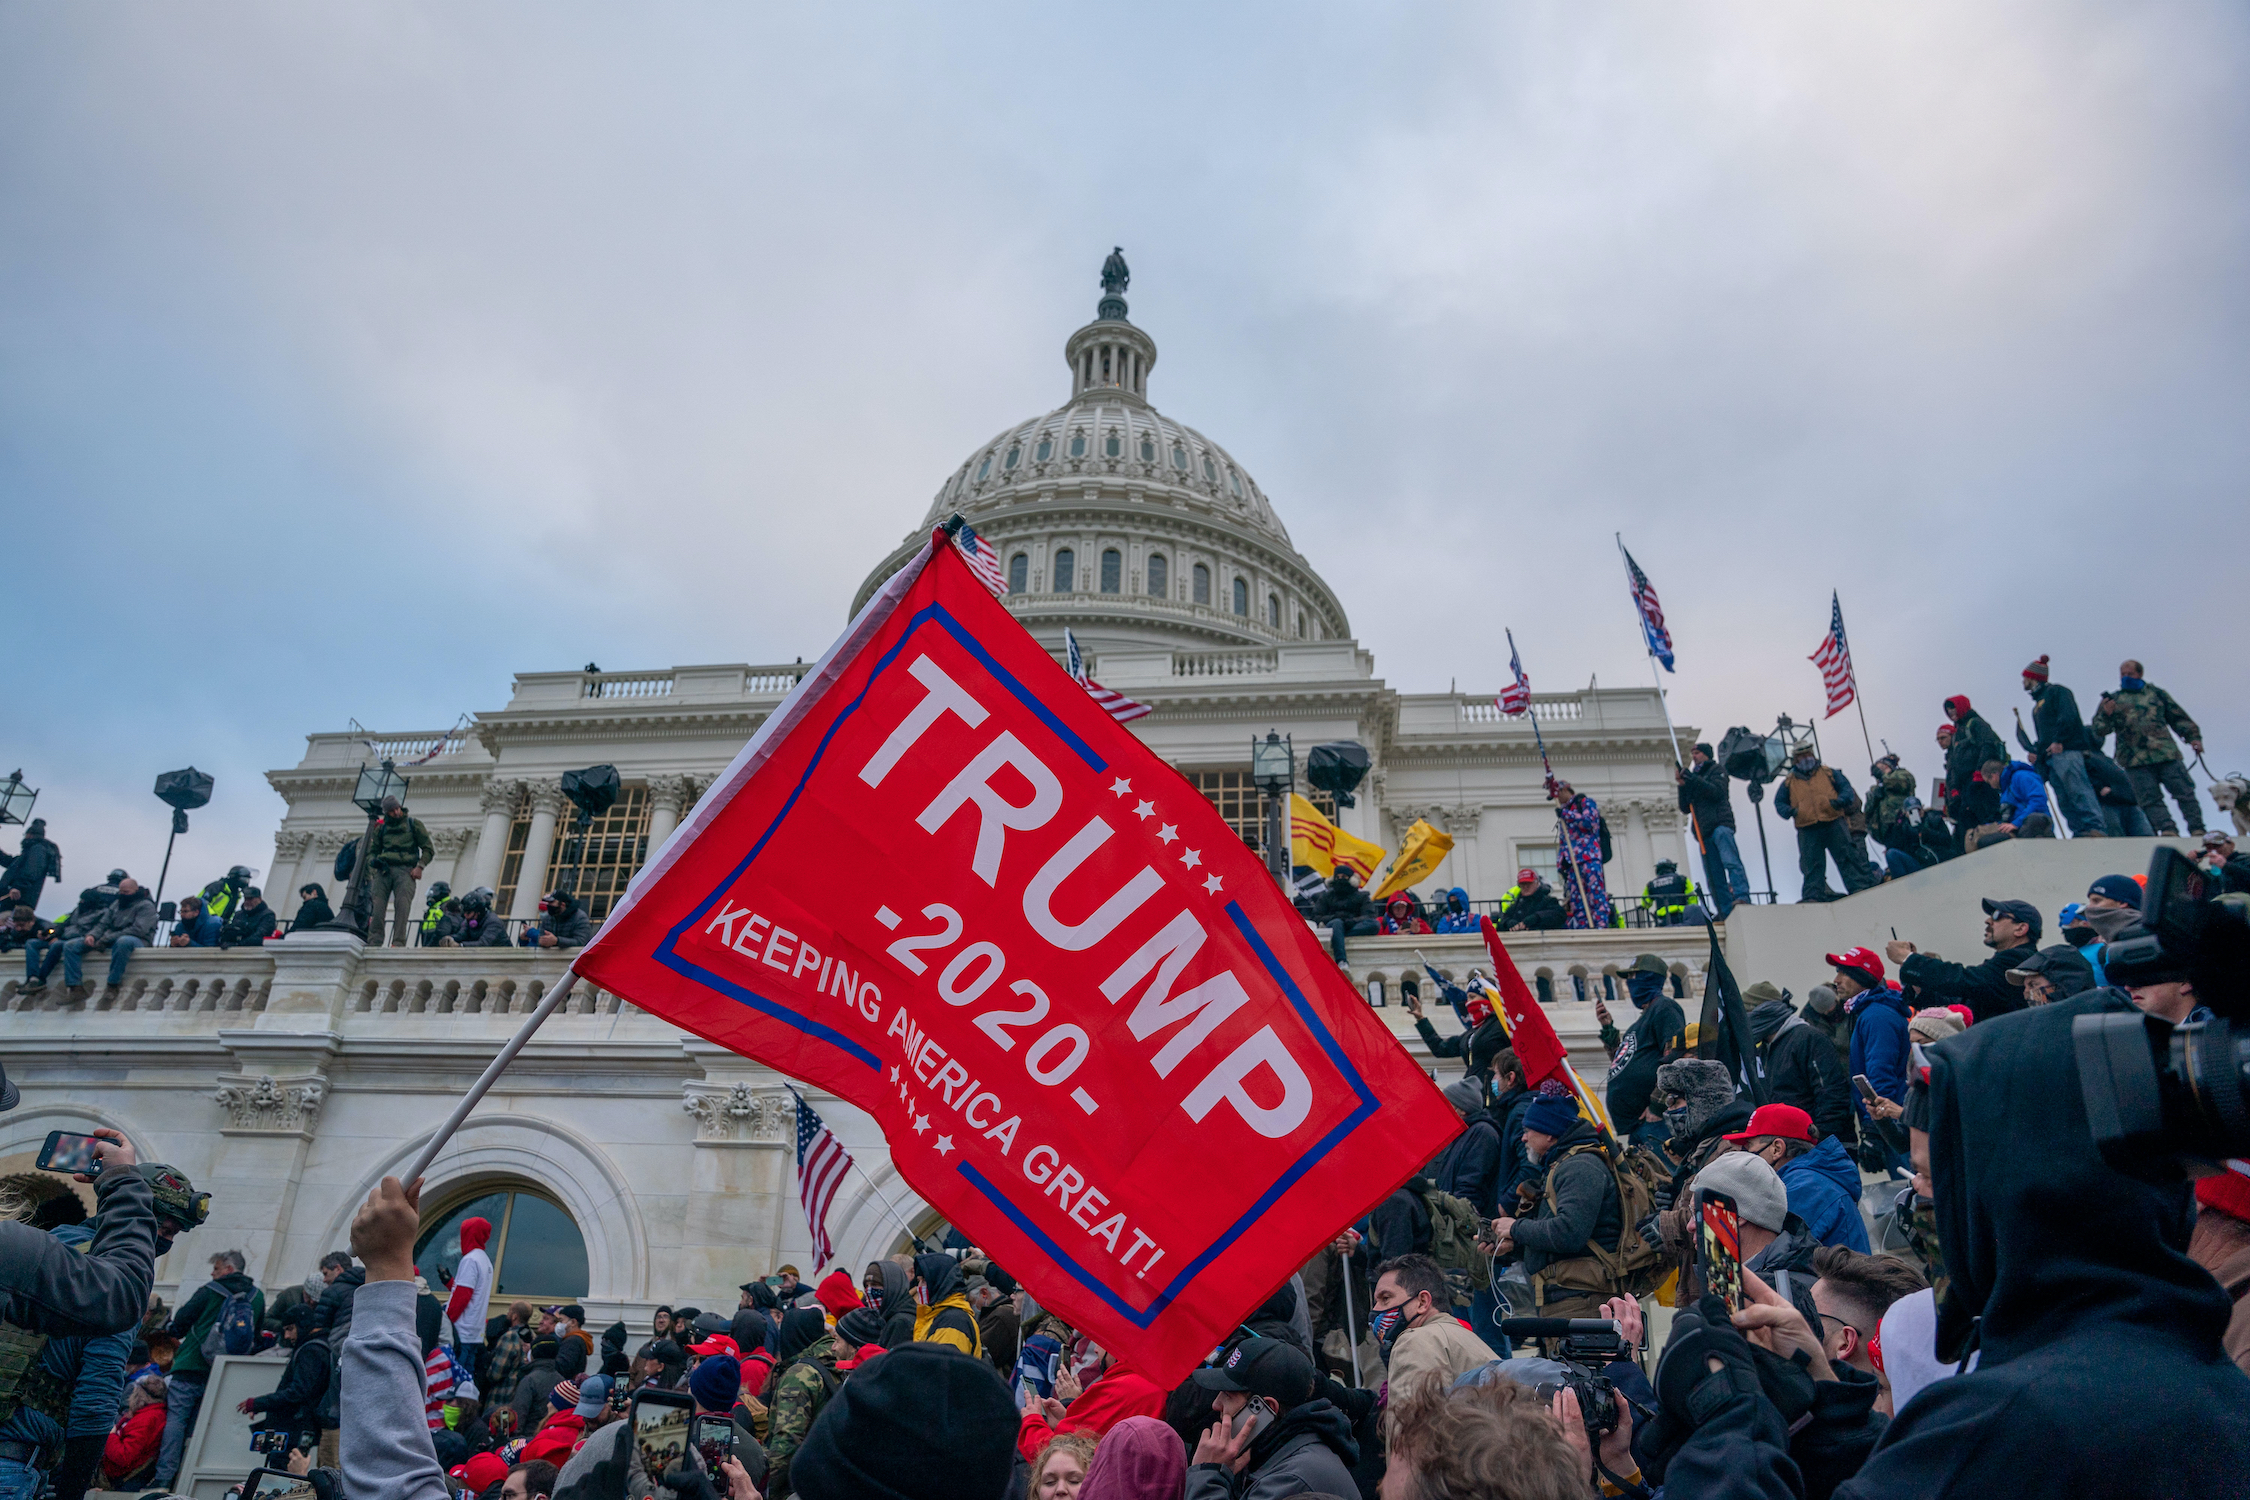 Trump 2020 flag flying as protestors cover Capitol steps